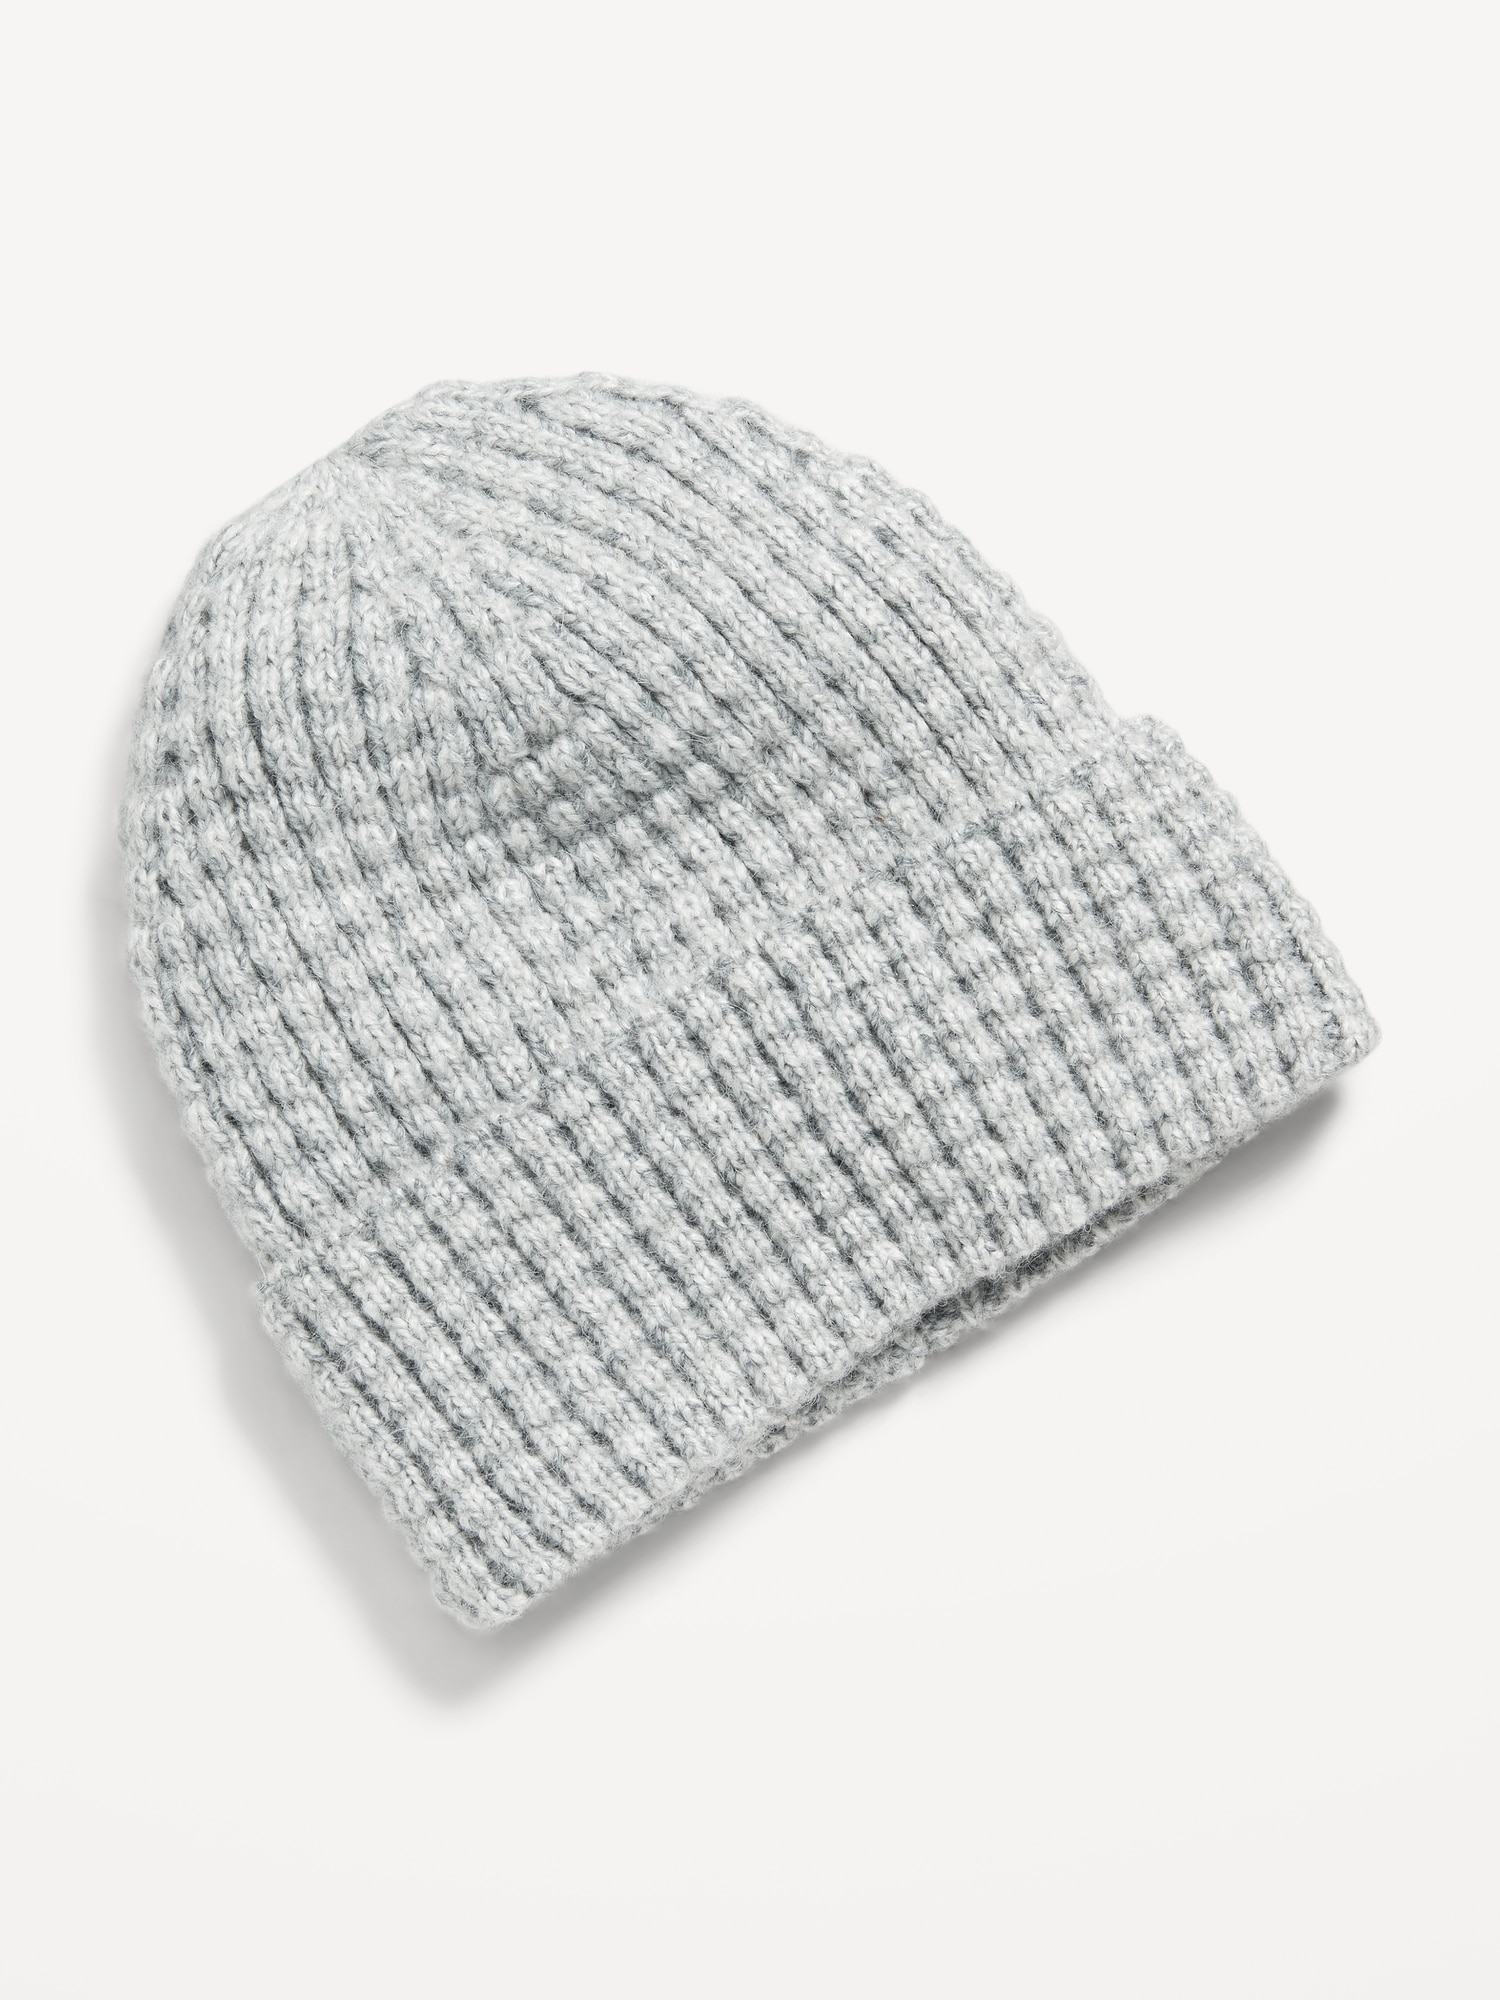 Gender-Neutral Waffle-Knit Beanie for Adults